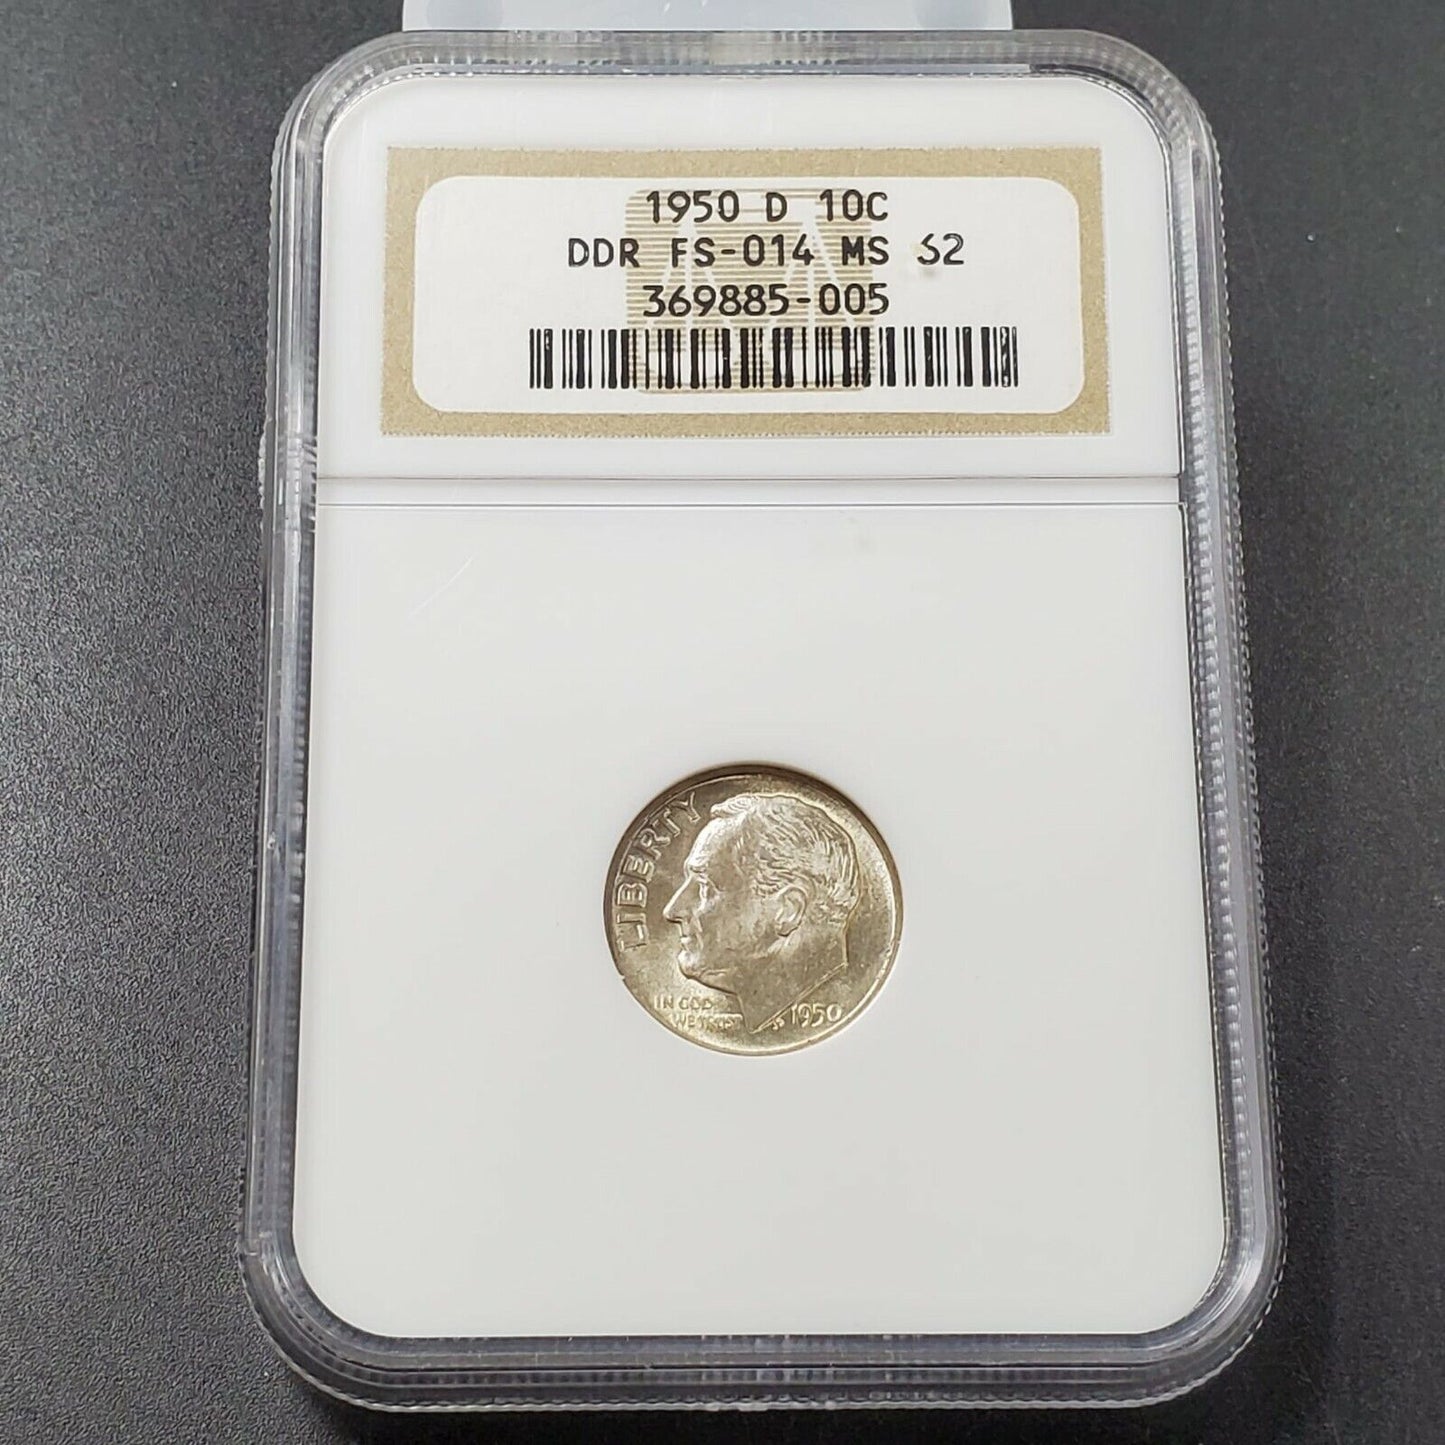 1950 D Roosevelt Dime Silver Coin NGC MS62 FS-801 (014)